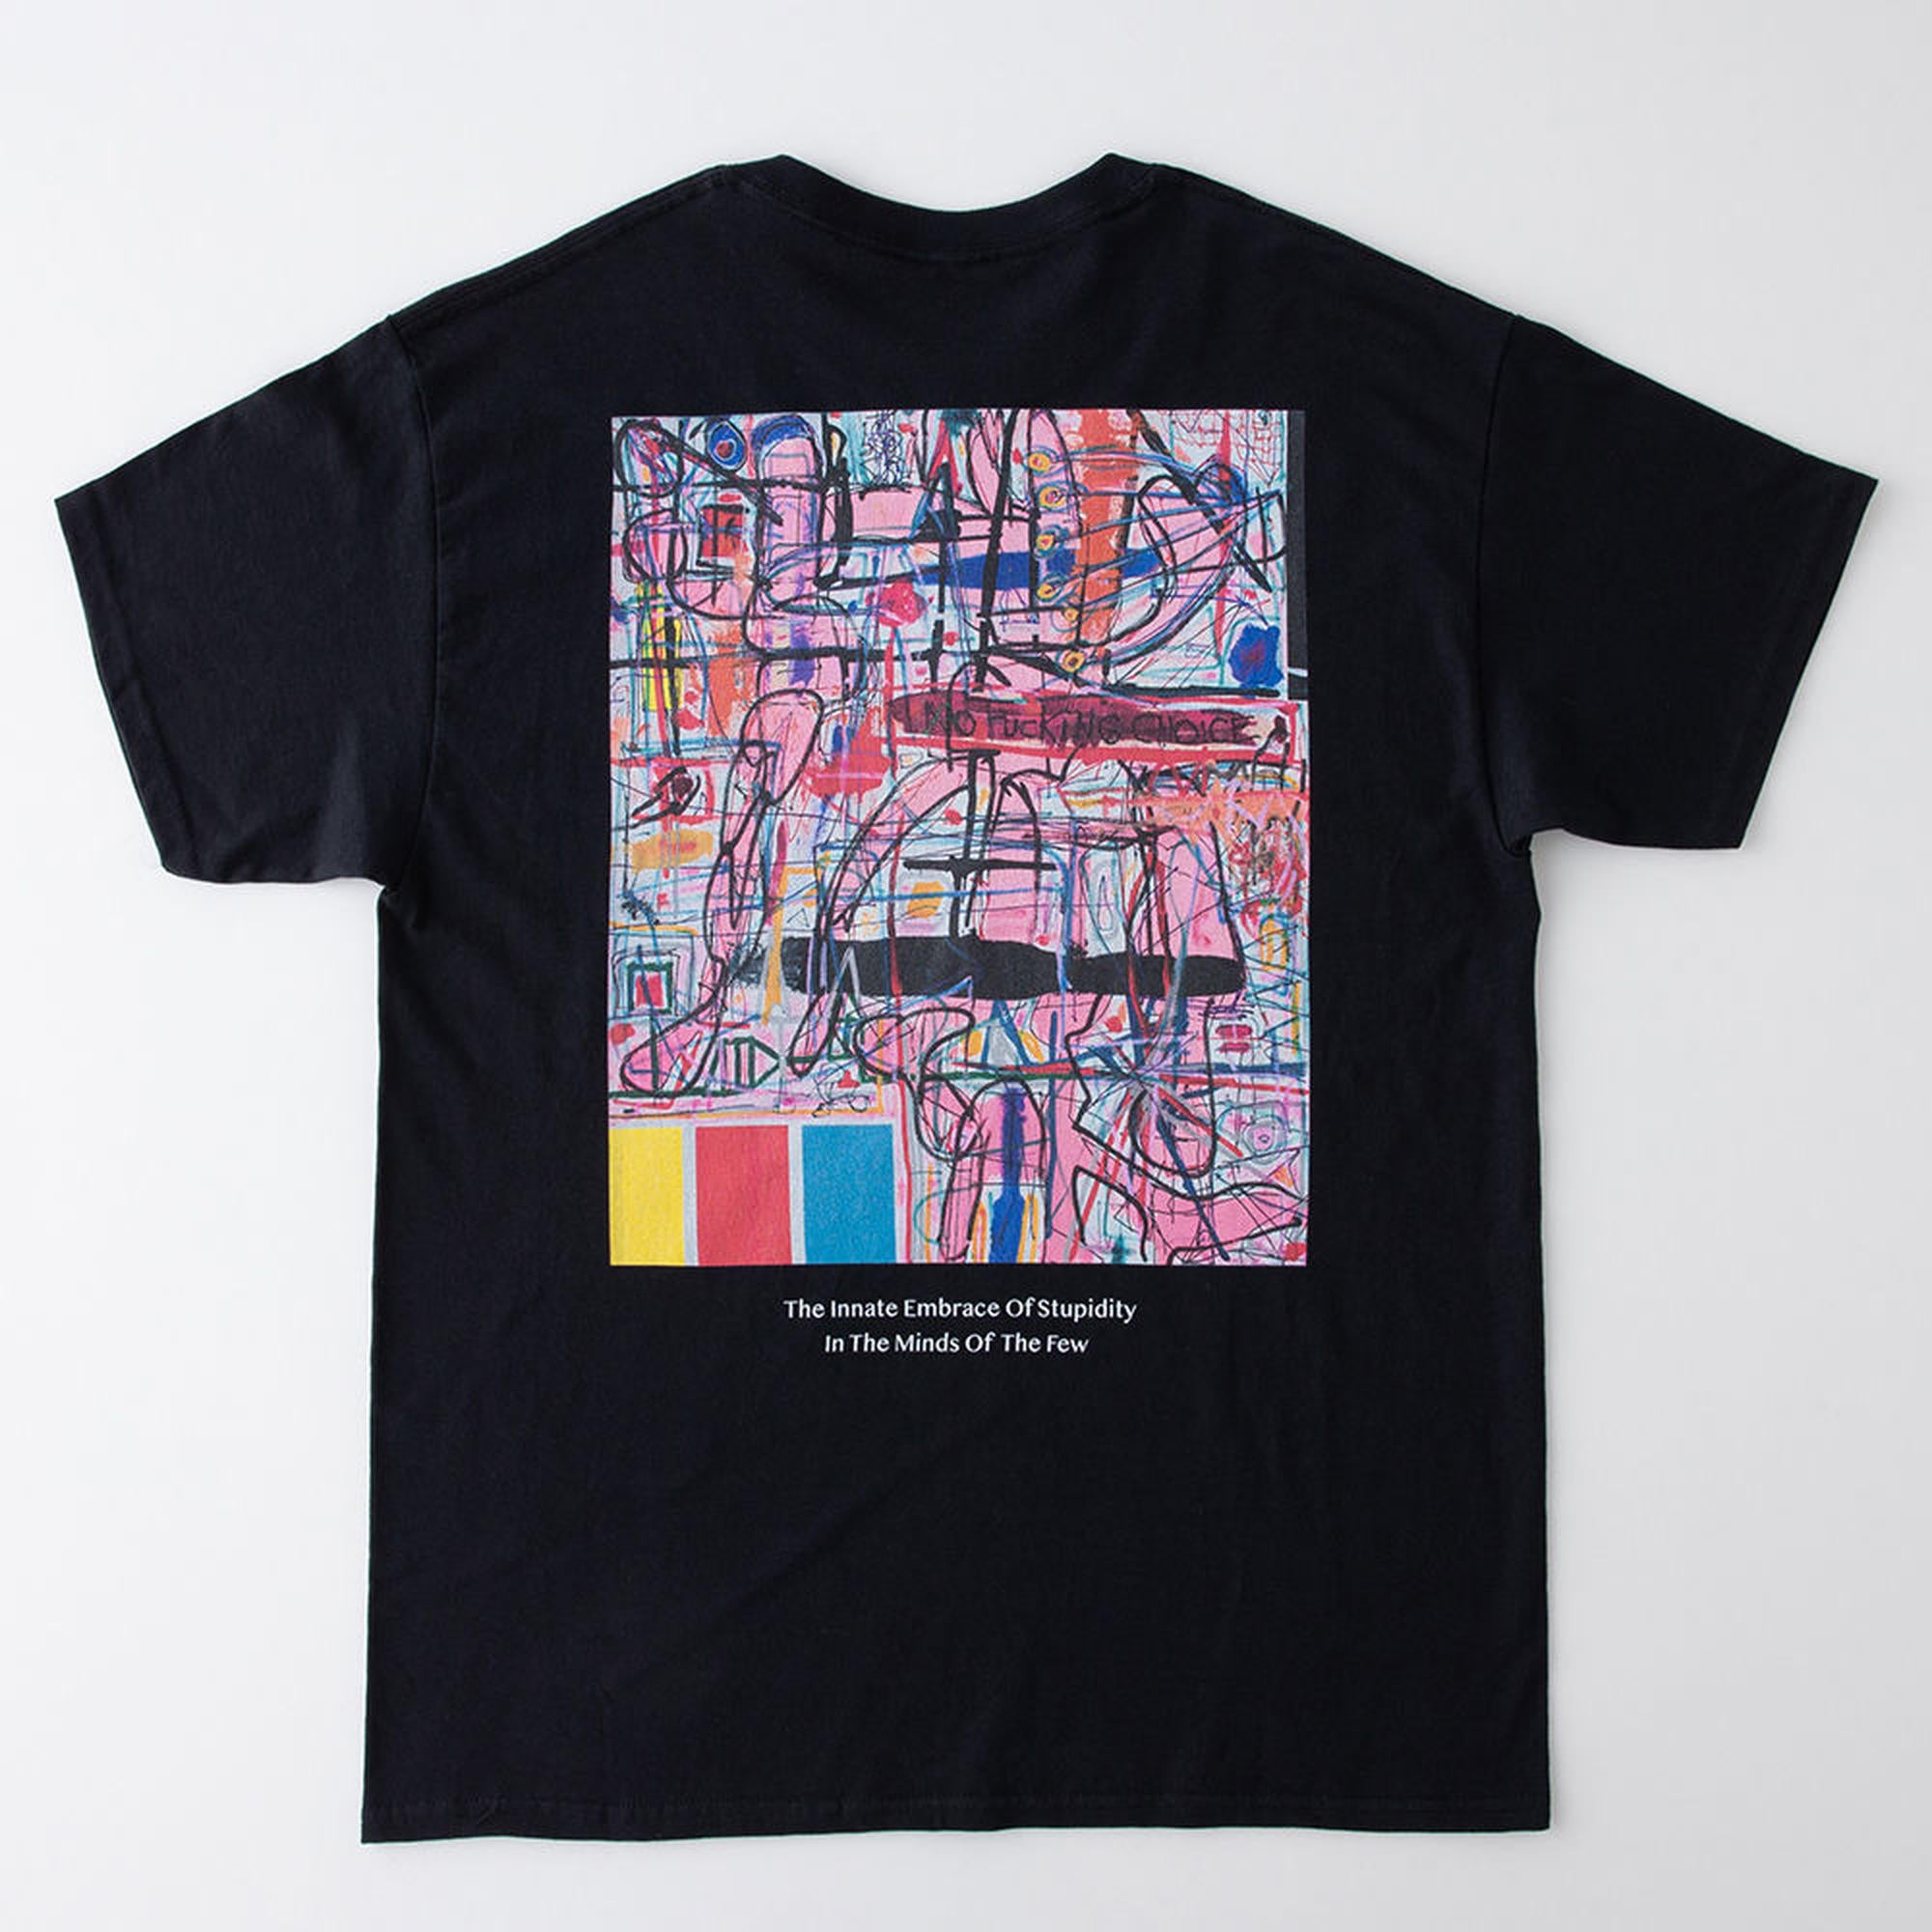 NICK WAPLINGTON - 'The Innate Embrace Of Stupidity In The Minds Of The Few' S/S TEE